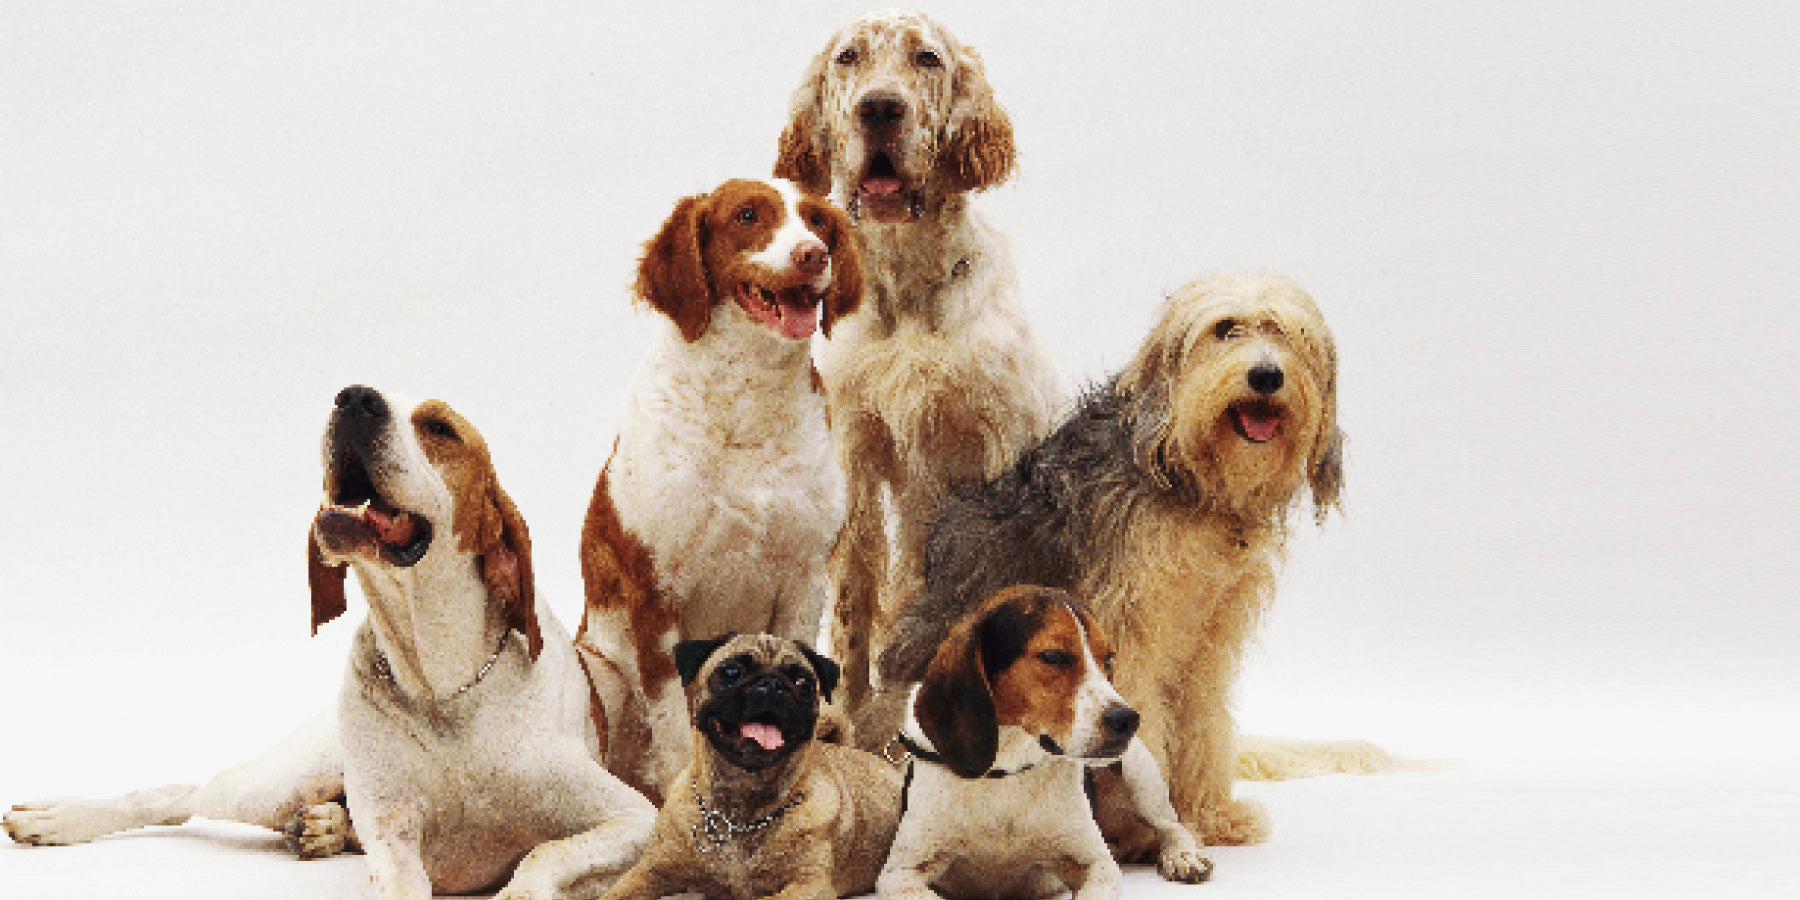 The Top 10 Most Popular Dog Breeds in the World